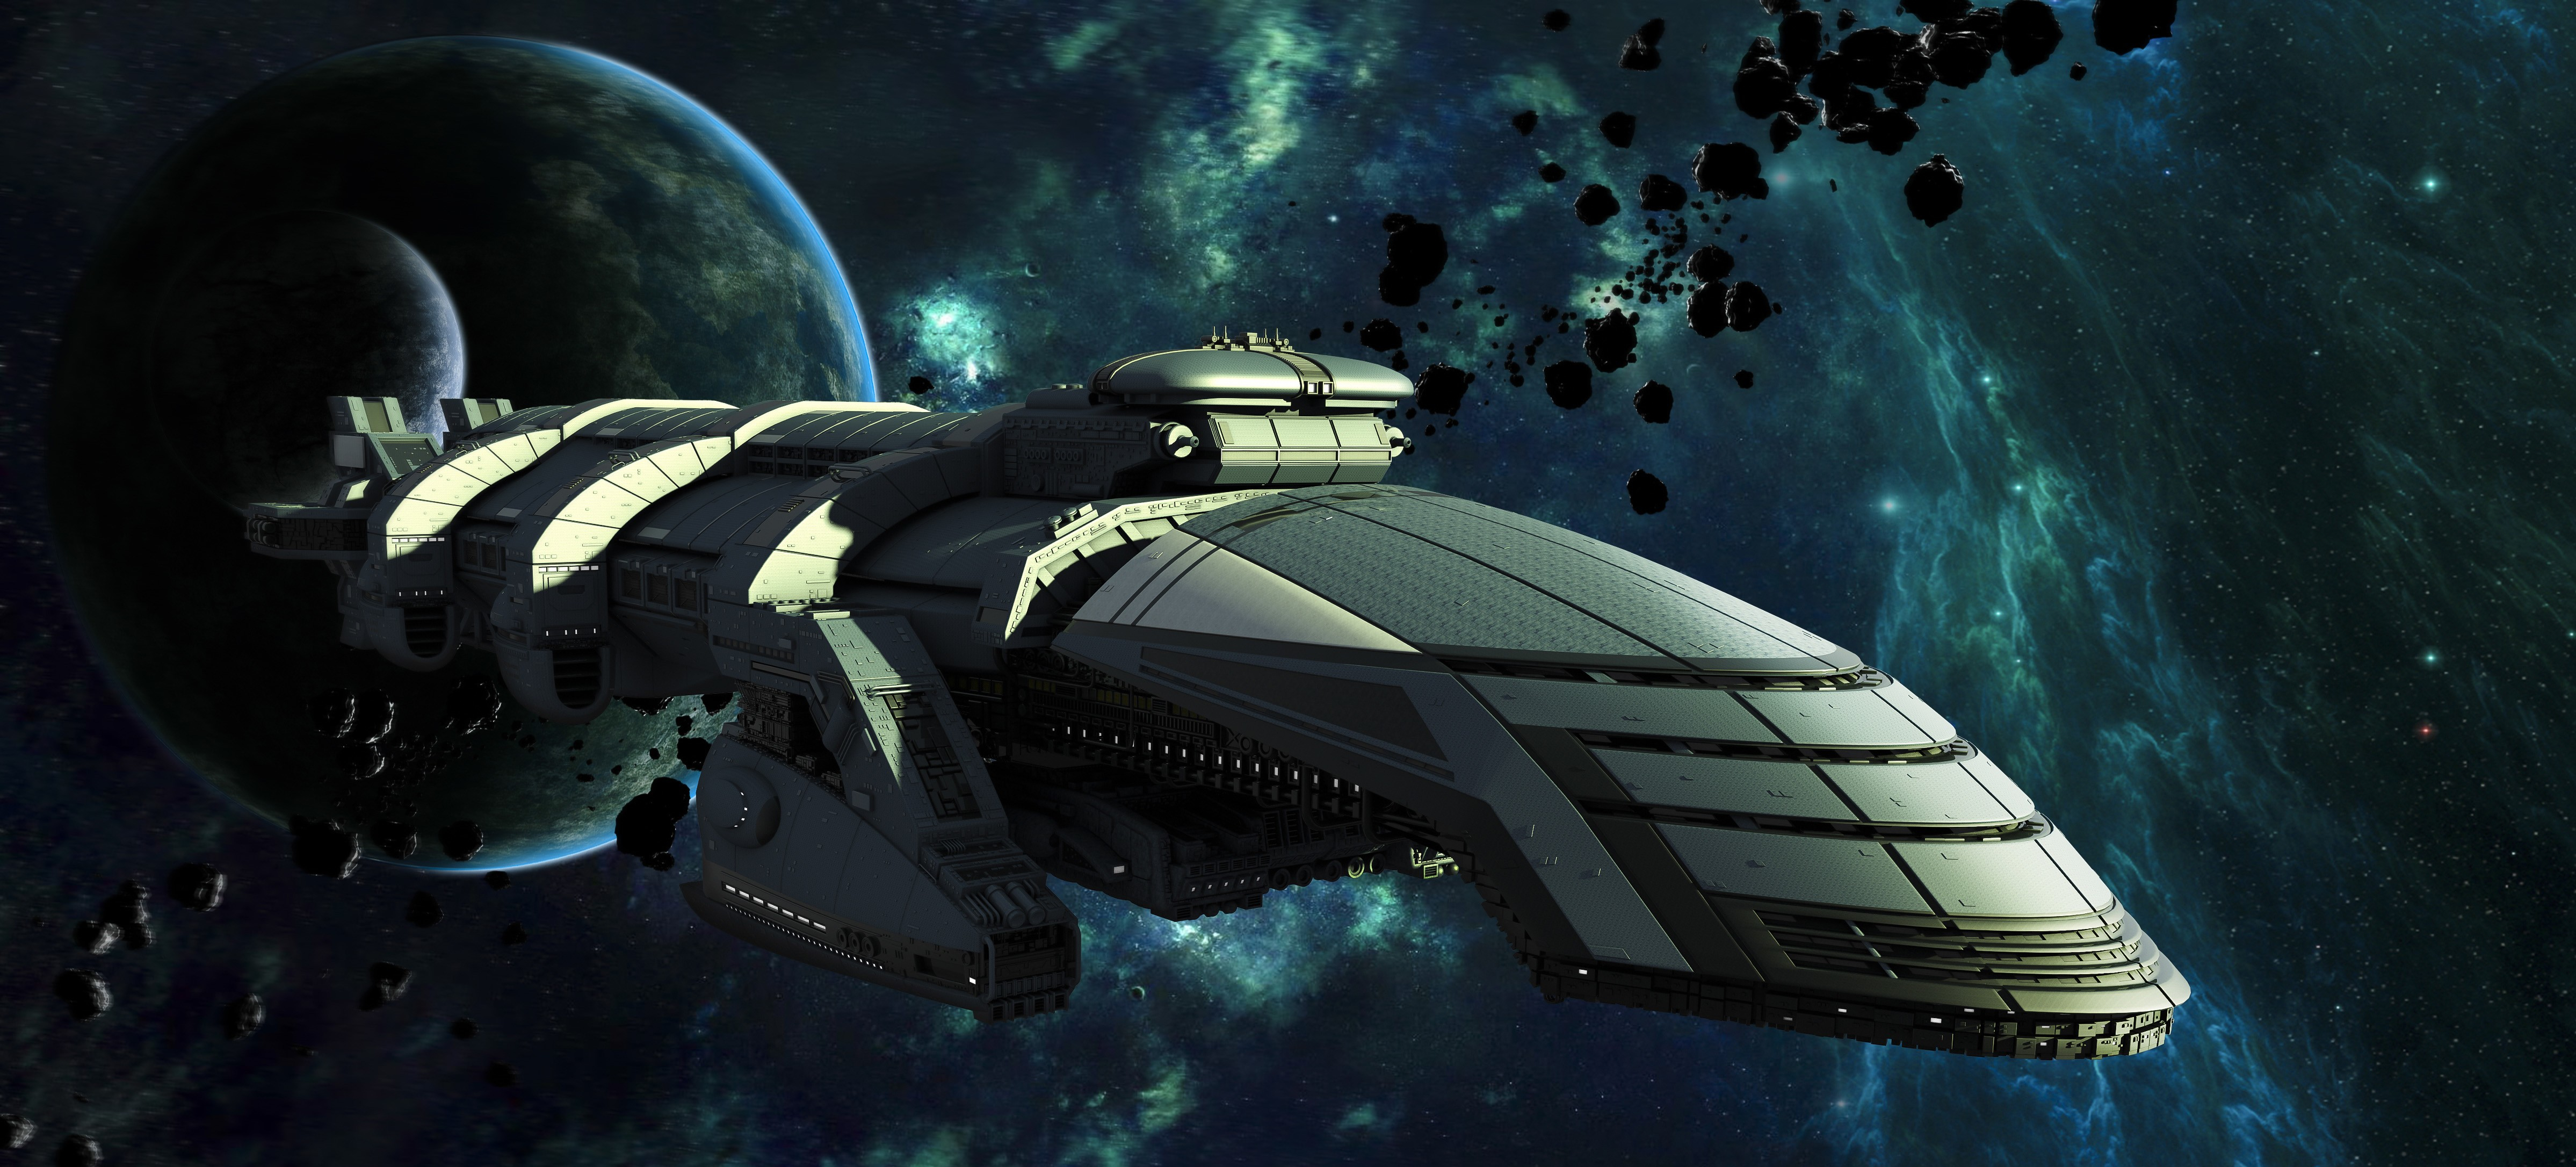 General 4796x2172 space spaceship planet science fiction